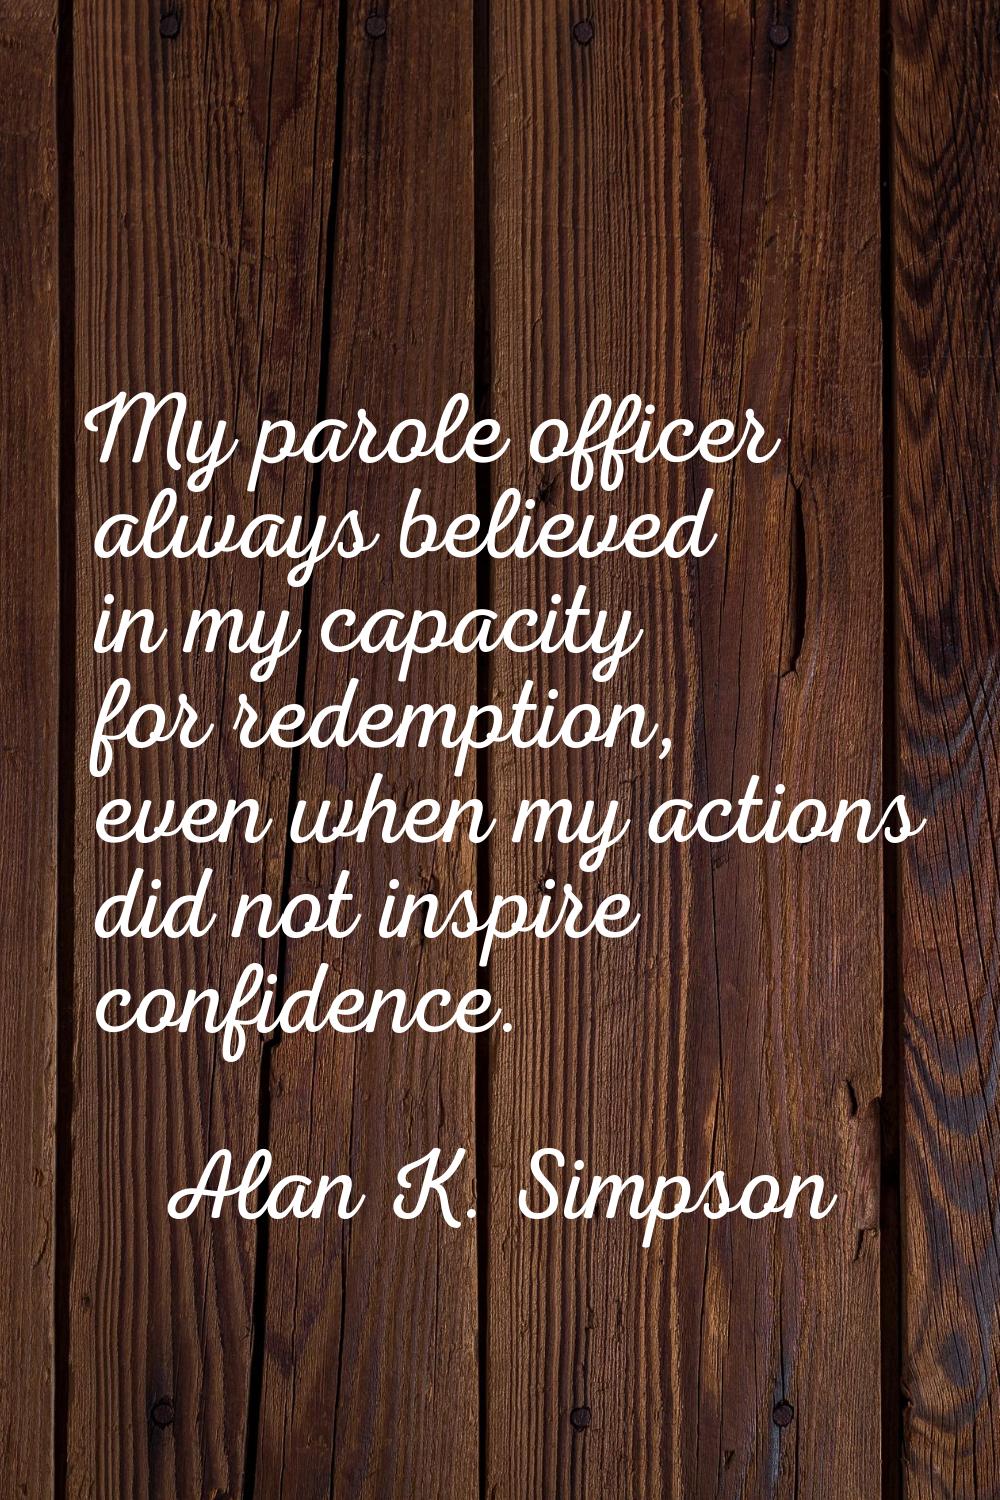 My parole officer always believed in my capacity for redemption, even when my actions did not inspi